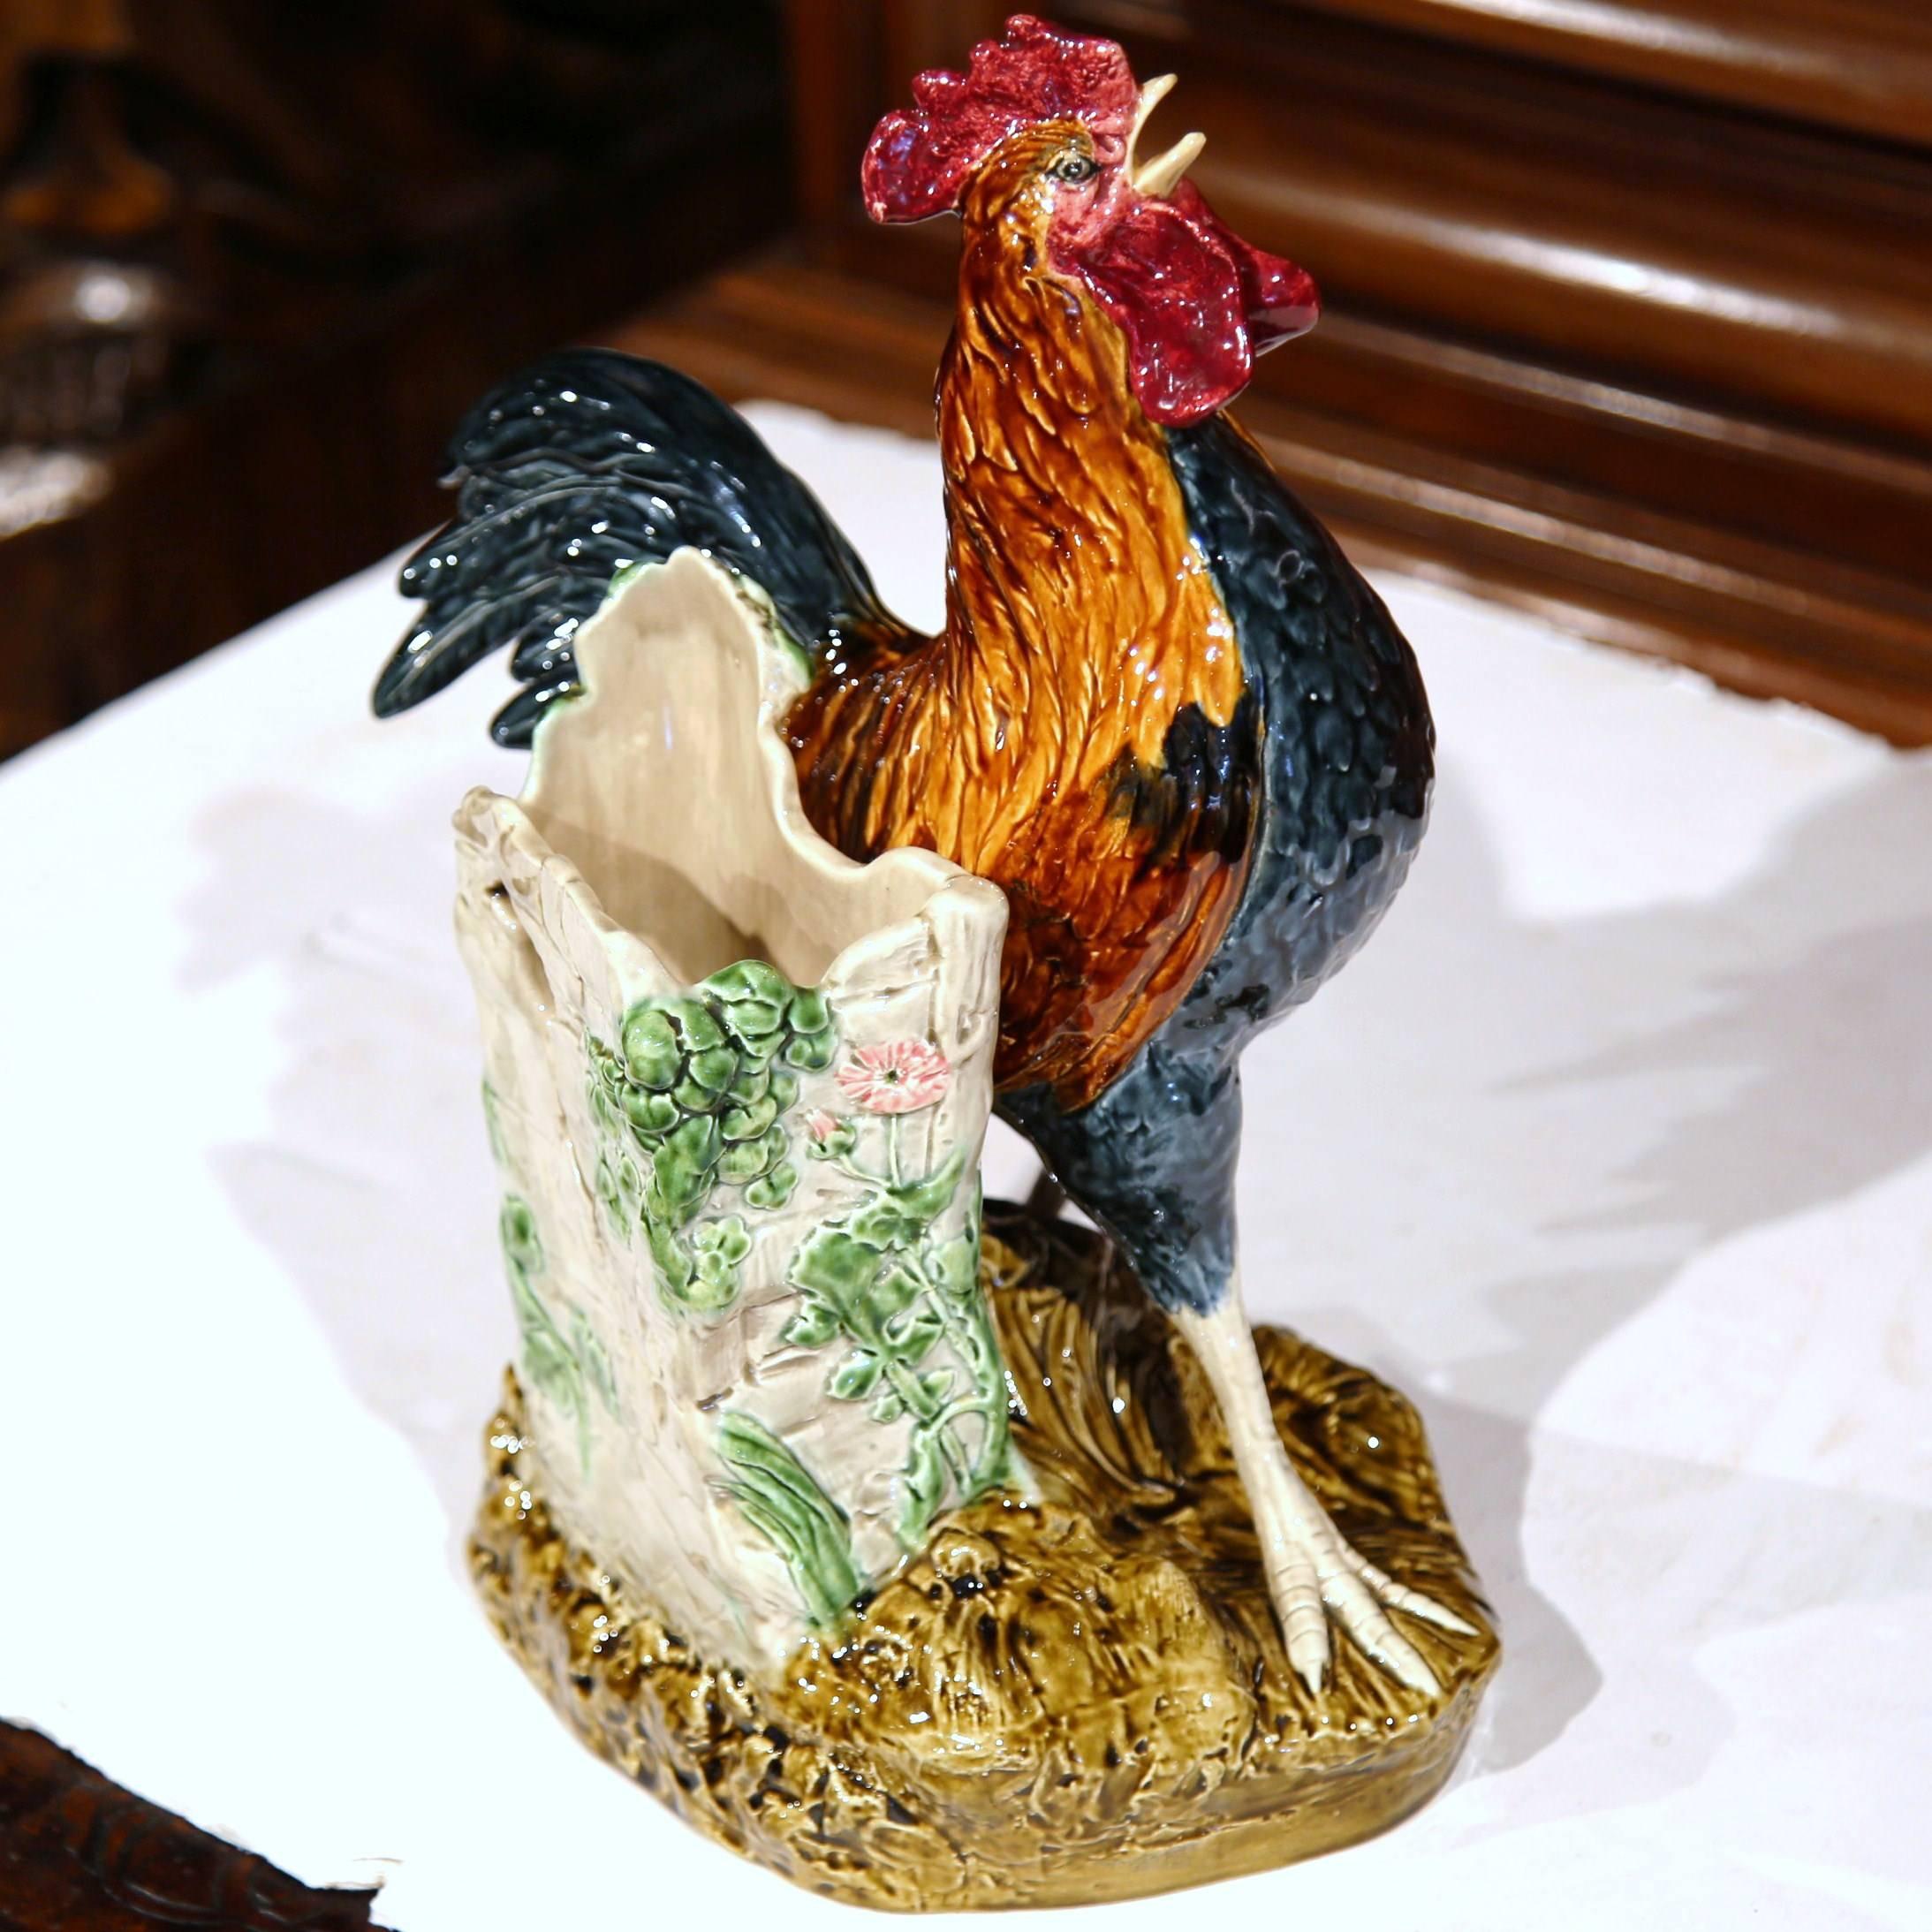 Faience 19th Century French Painted Barbotine Rooster Vase Signed Louis Carrier-Belleuse